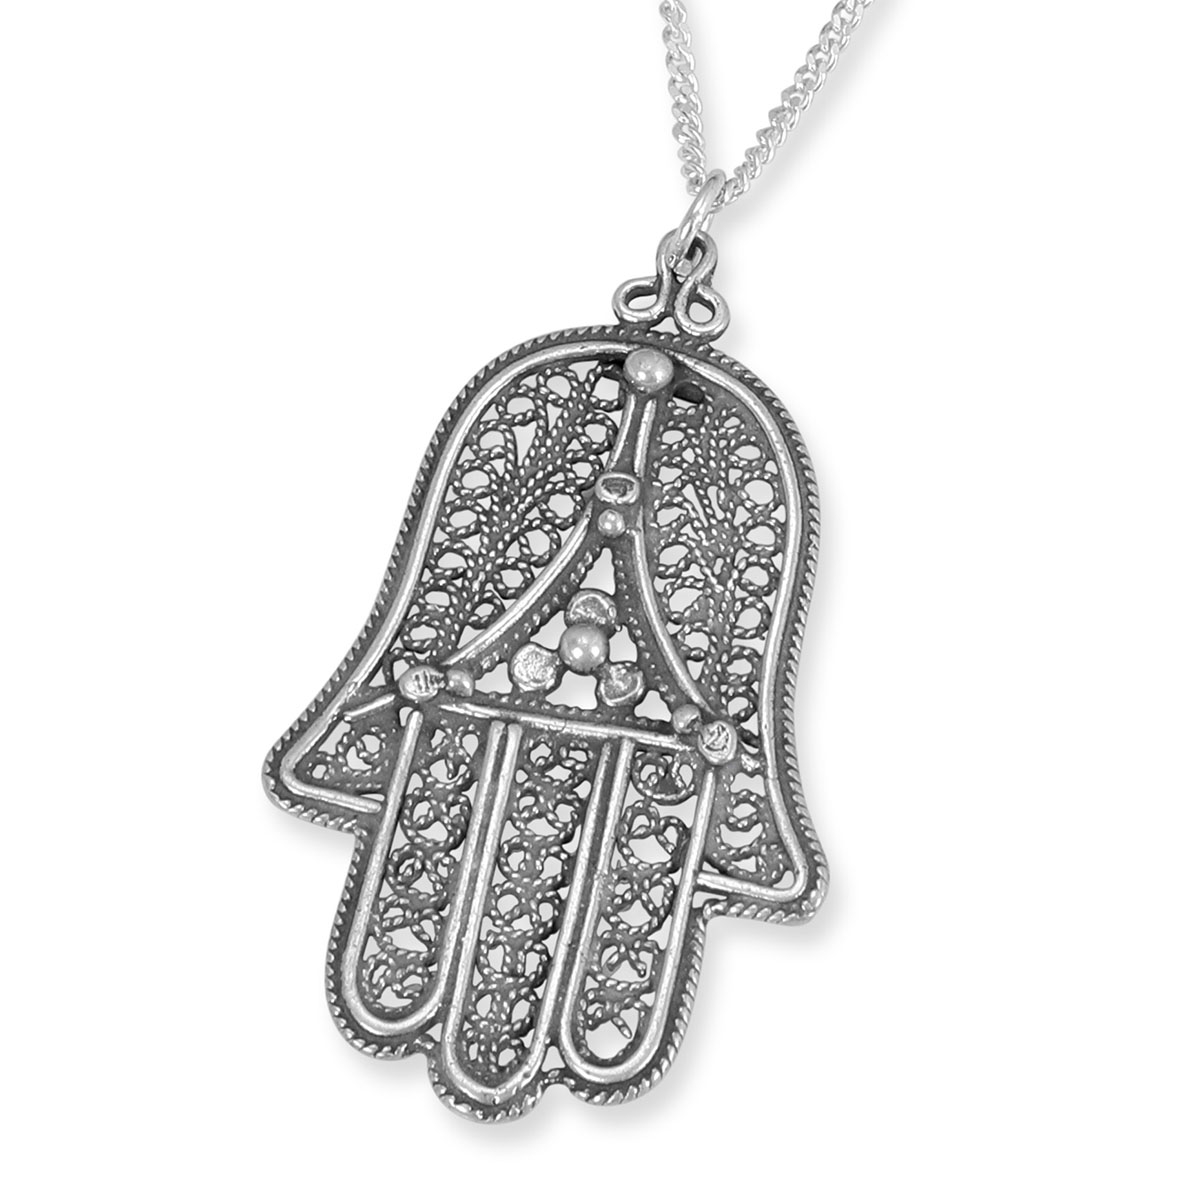 Traditional Yemenite Art Handcrafted Sterling Silver Hamsa Necklace With Elegant Cord Design - 1